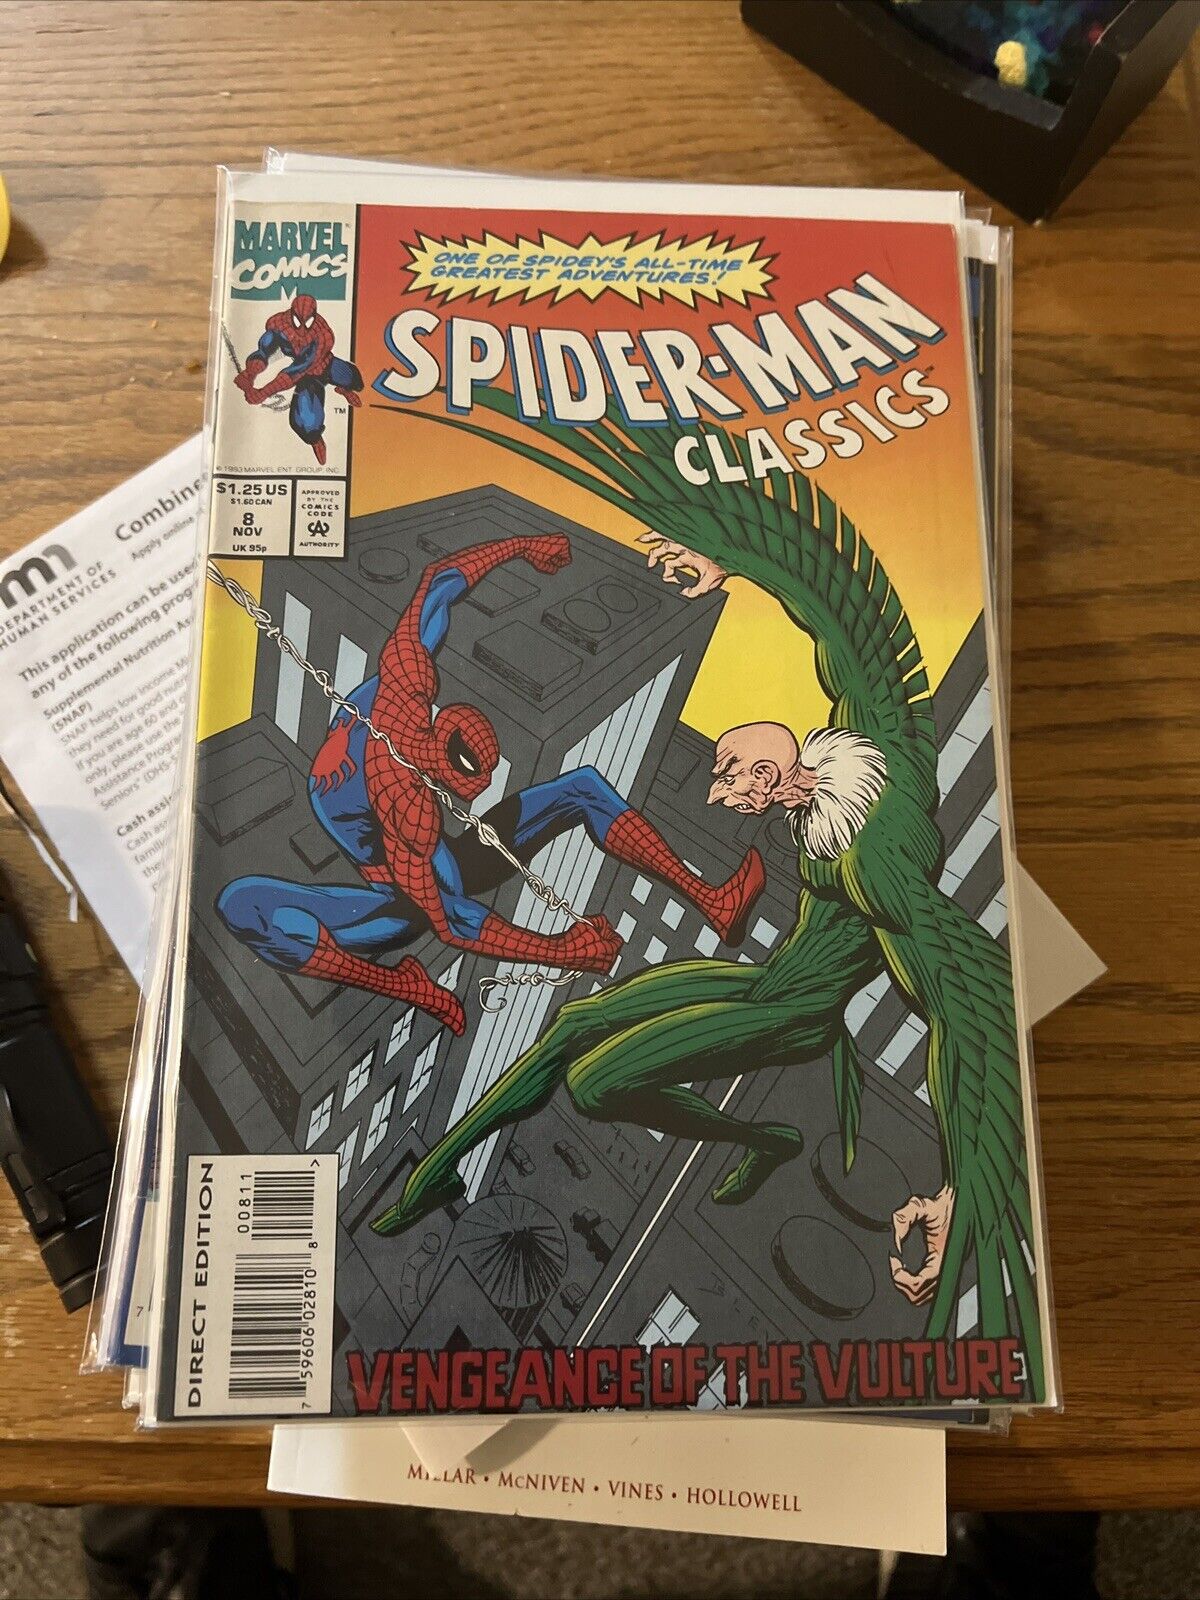 SPIDER-MAN CLASSICS #8 THE RETURN OF THE VULTURE (1993)